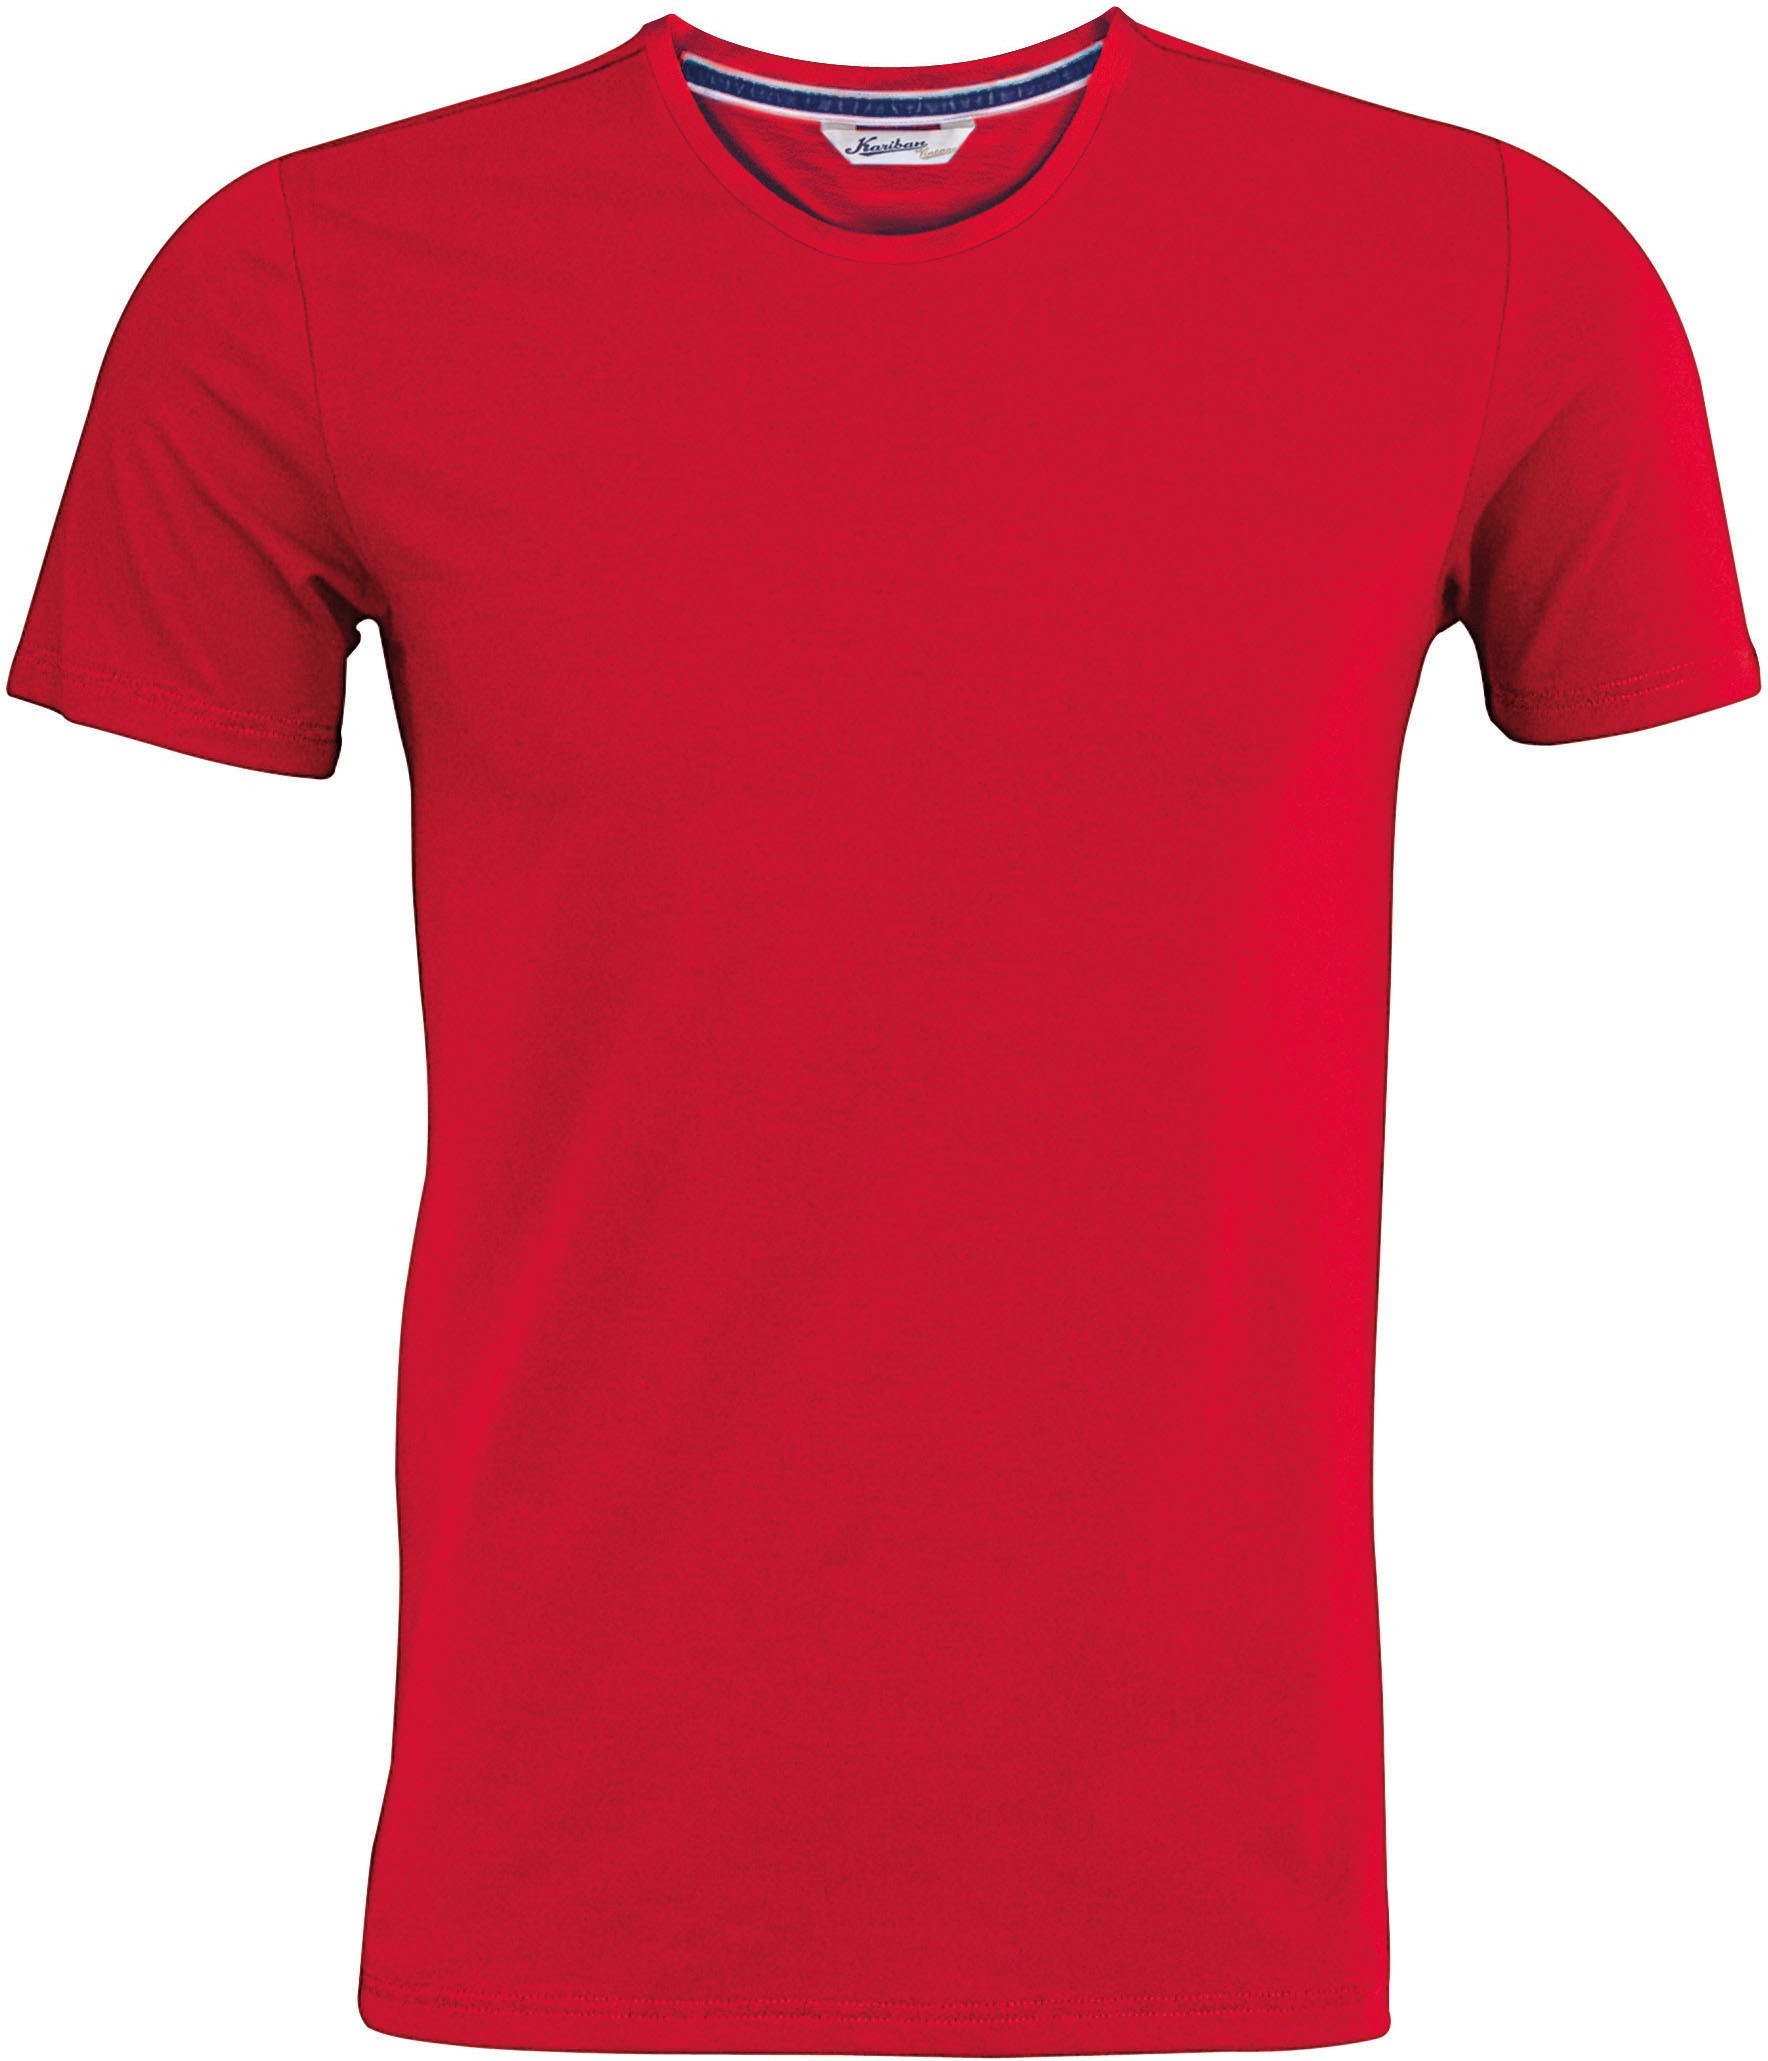 Vintage classic men's t-shirt red - Cold Company